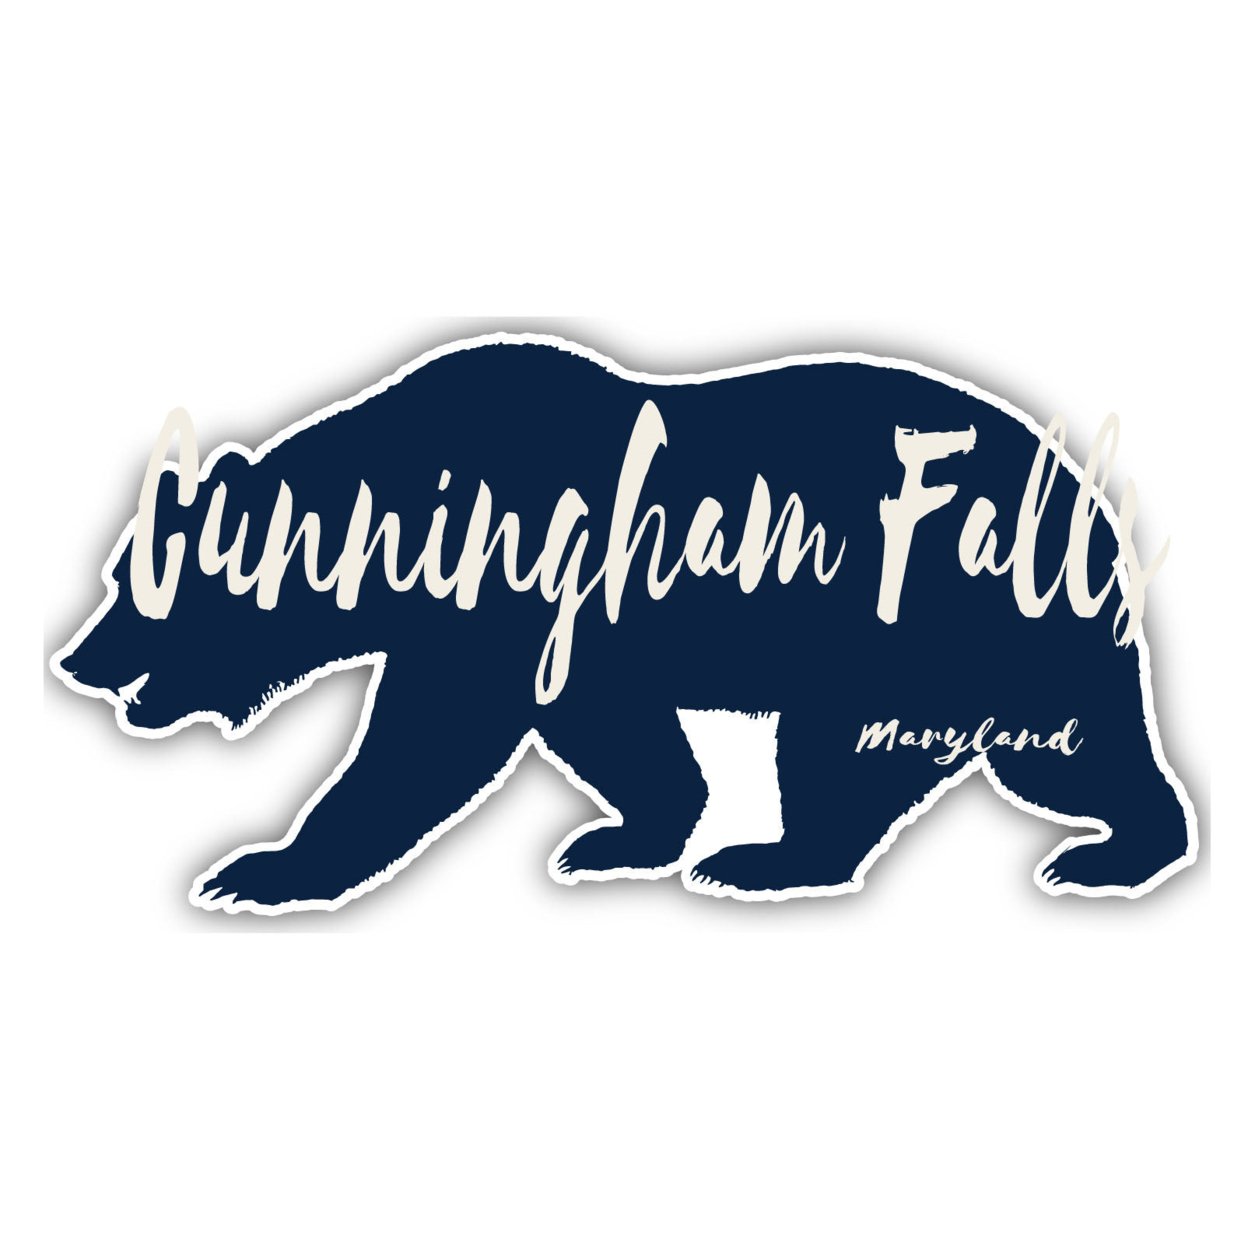 Cunningham Falls Maryland Souvenir Decorative Stickers (Choose Theme And Size) - Single Unit, 2-Inch, Bear